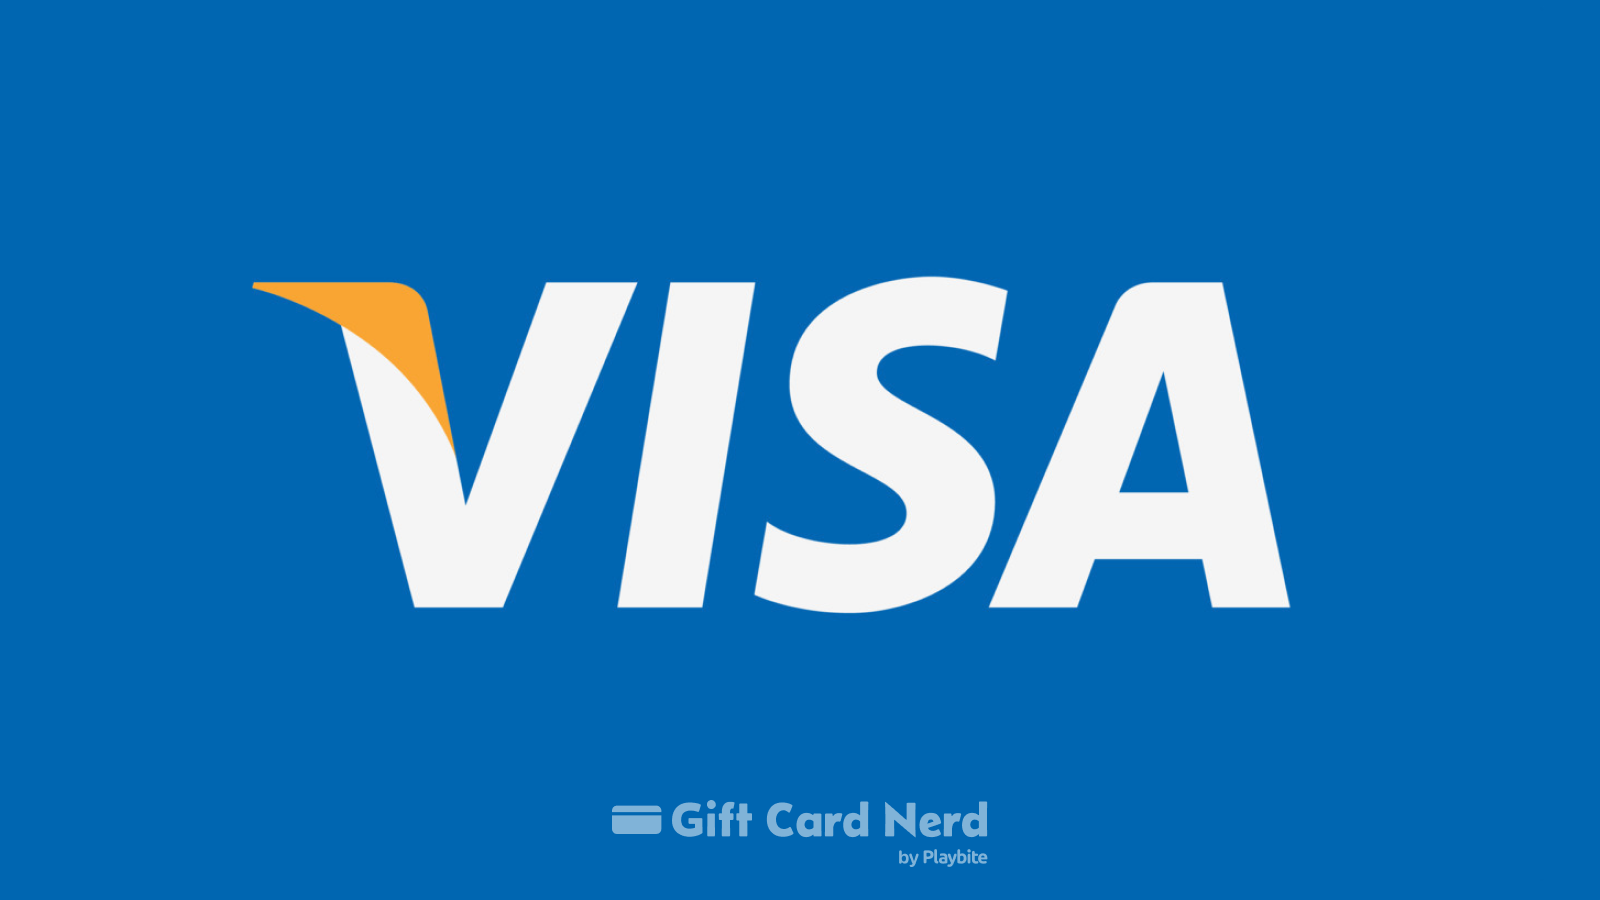 Can I use a Visa gift card on PayPal?